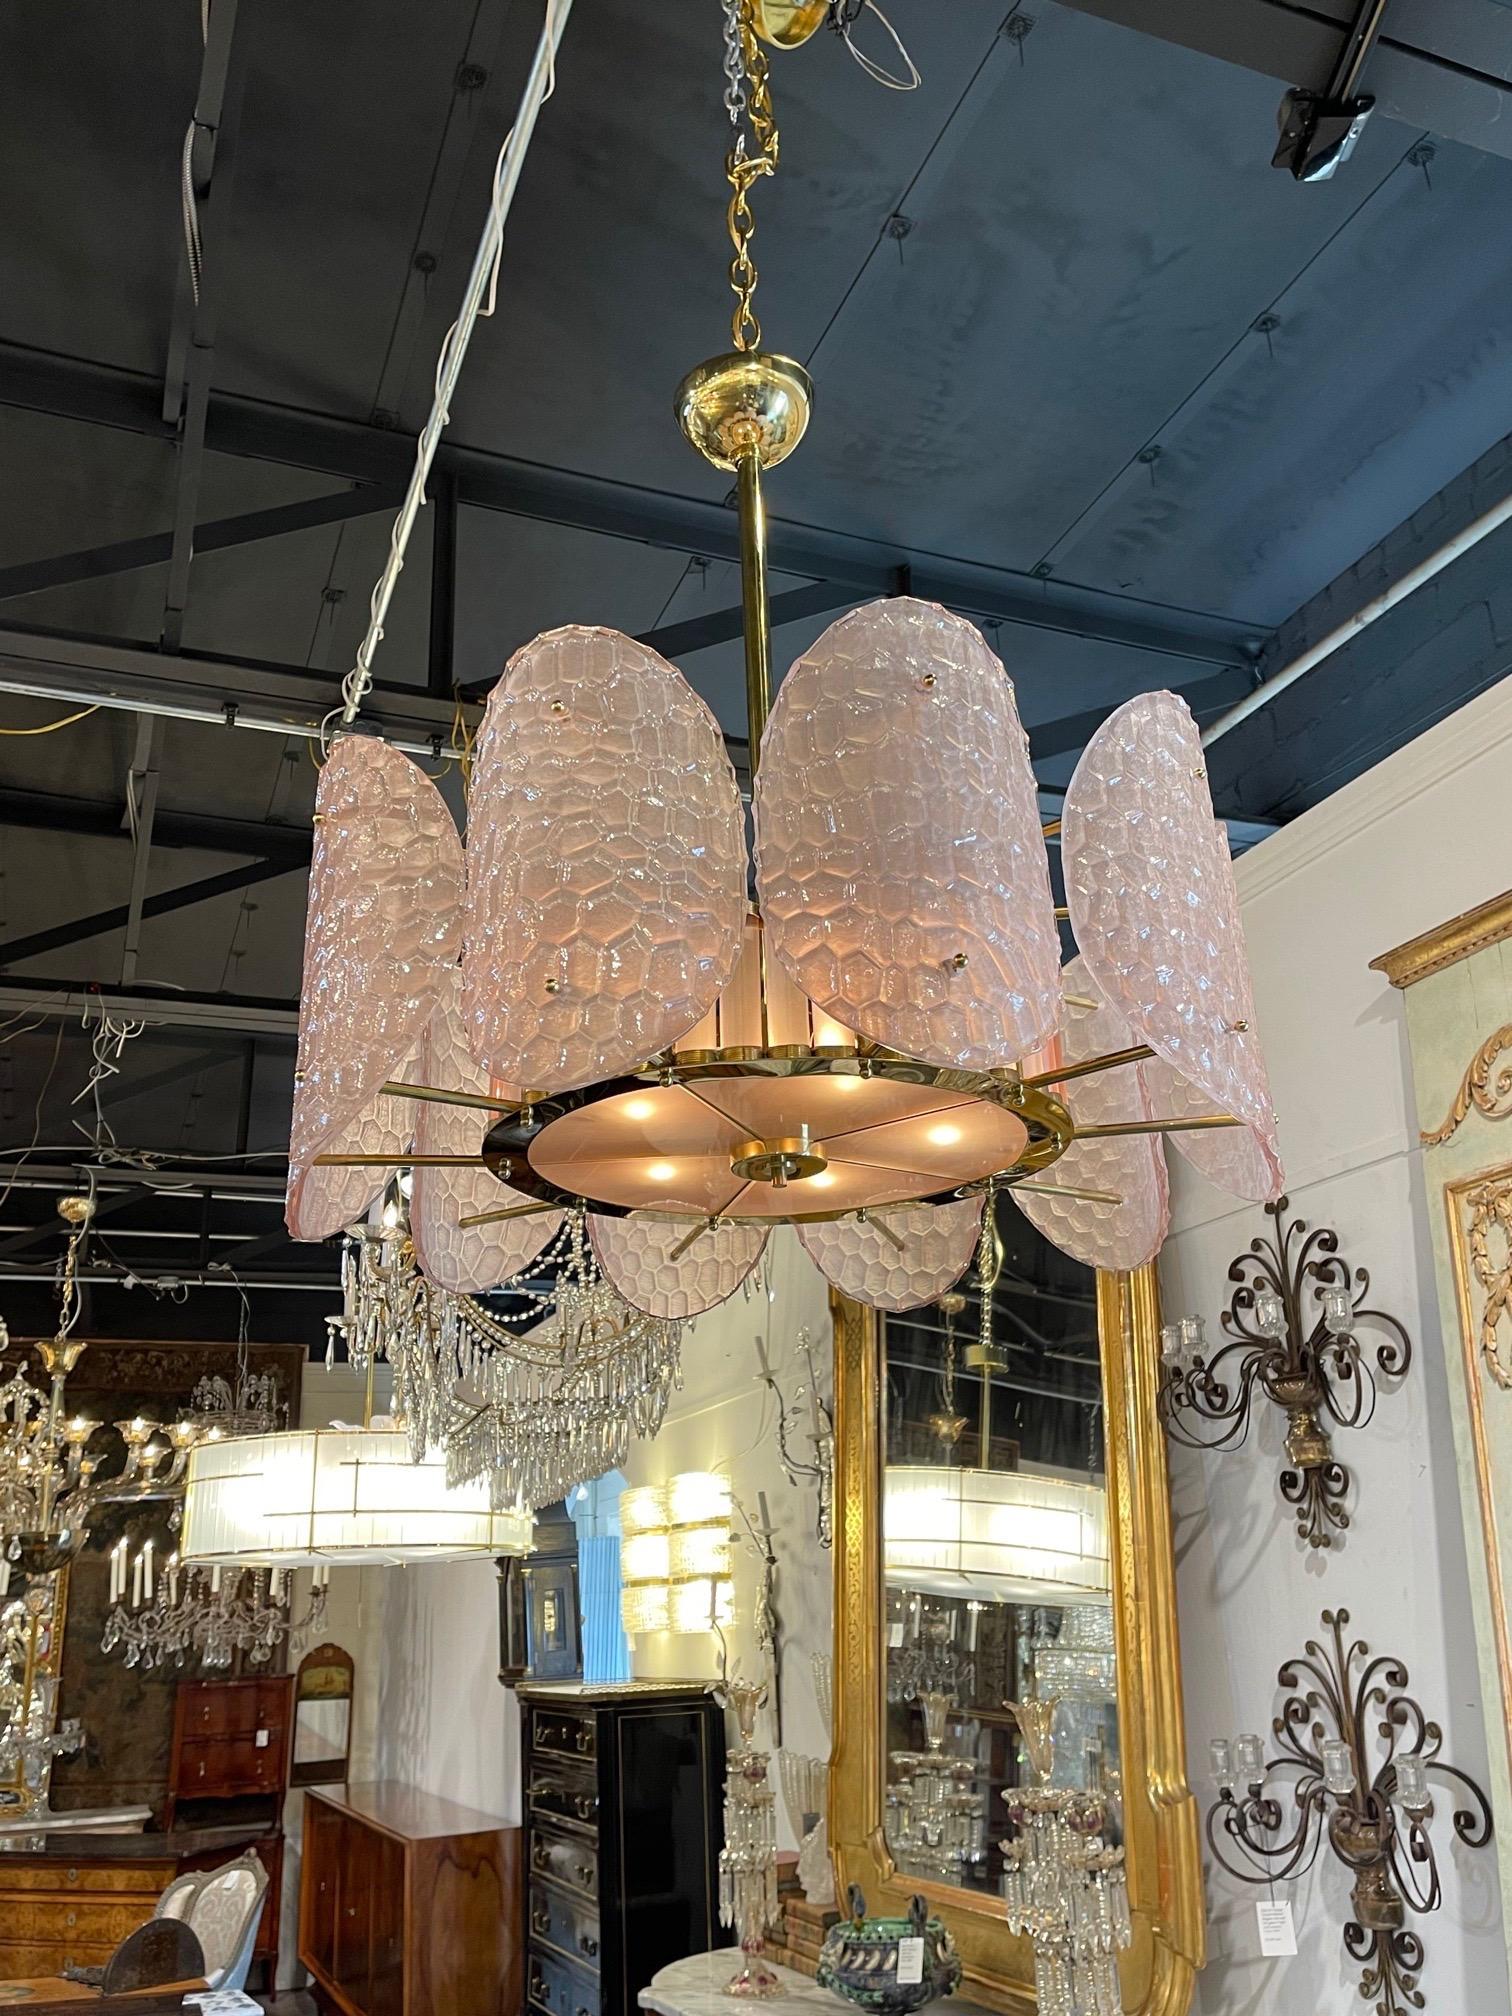 Exquisite Italian pink Murano glass and brass disc chandelier. The textured glass on the discs is a gorgeous pale pink. And the inside has is also a pretty pink in a decorative brass base. Stunning!